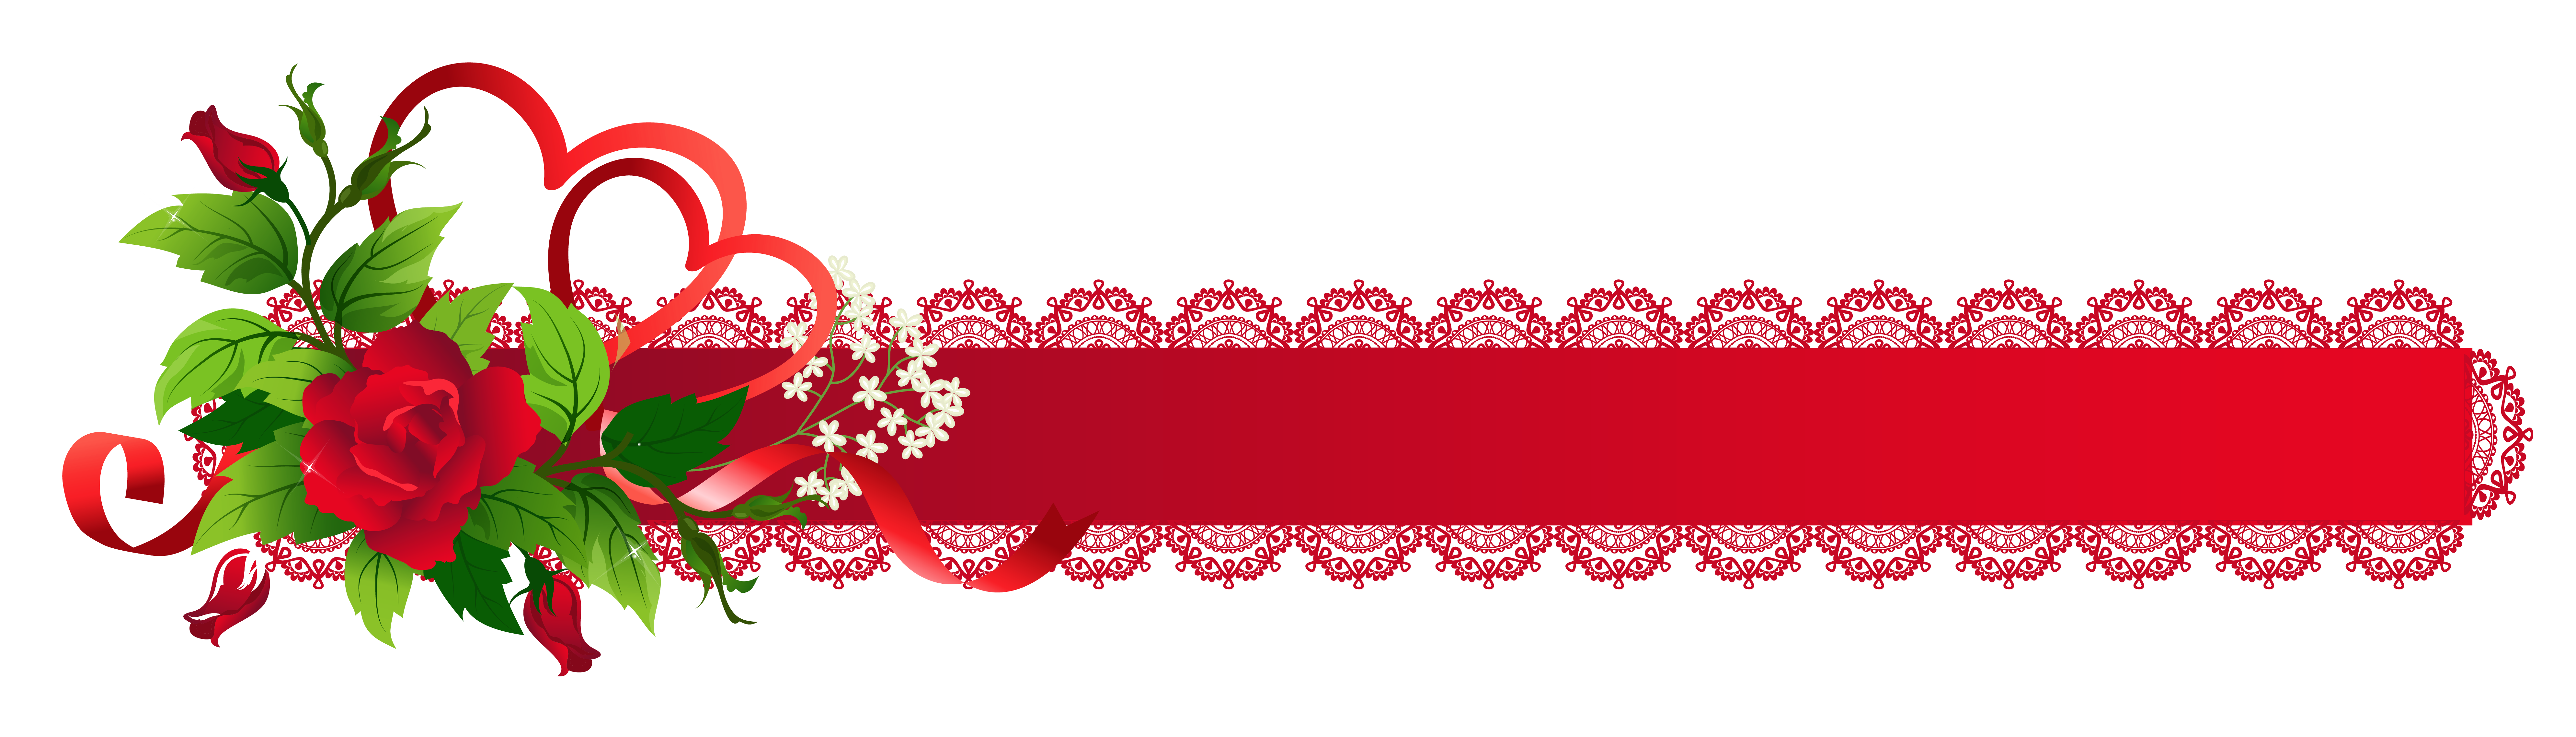 Clipart rose banner. Red deco ribbon with